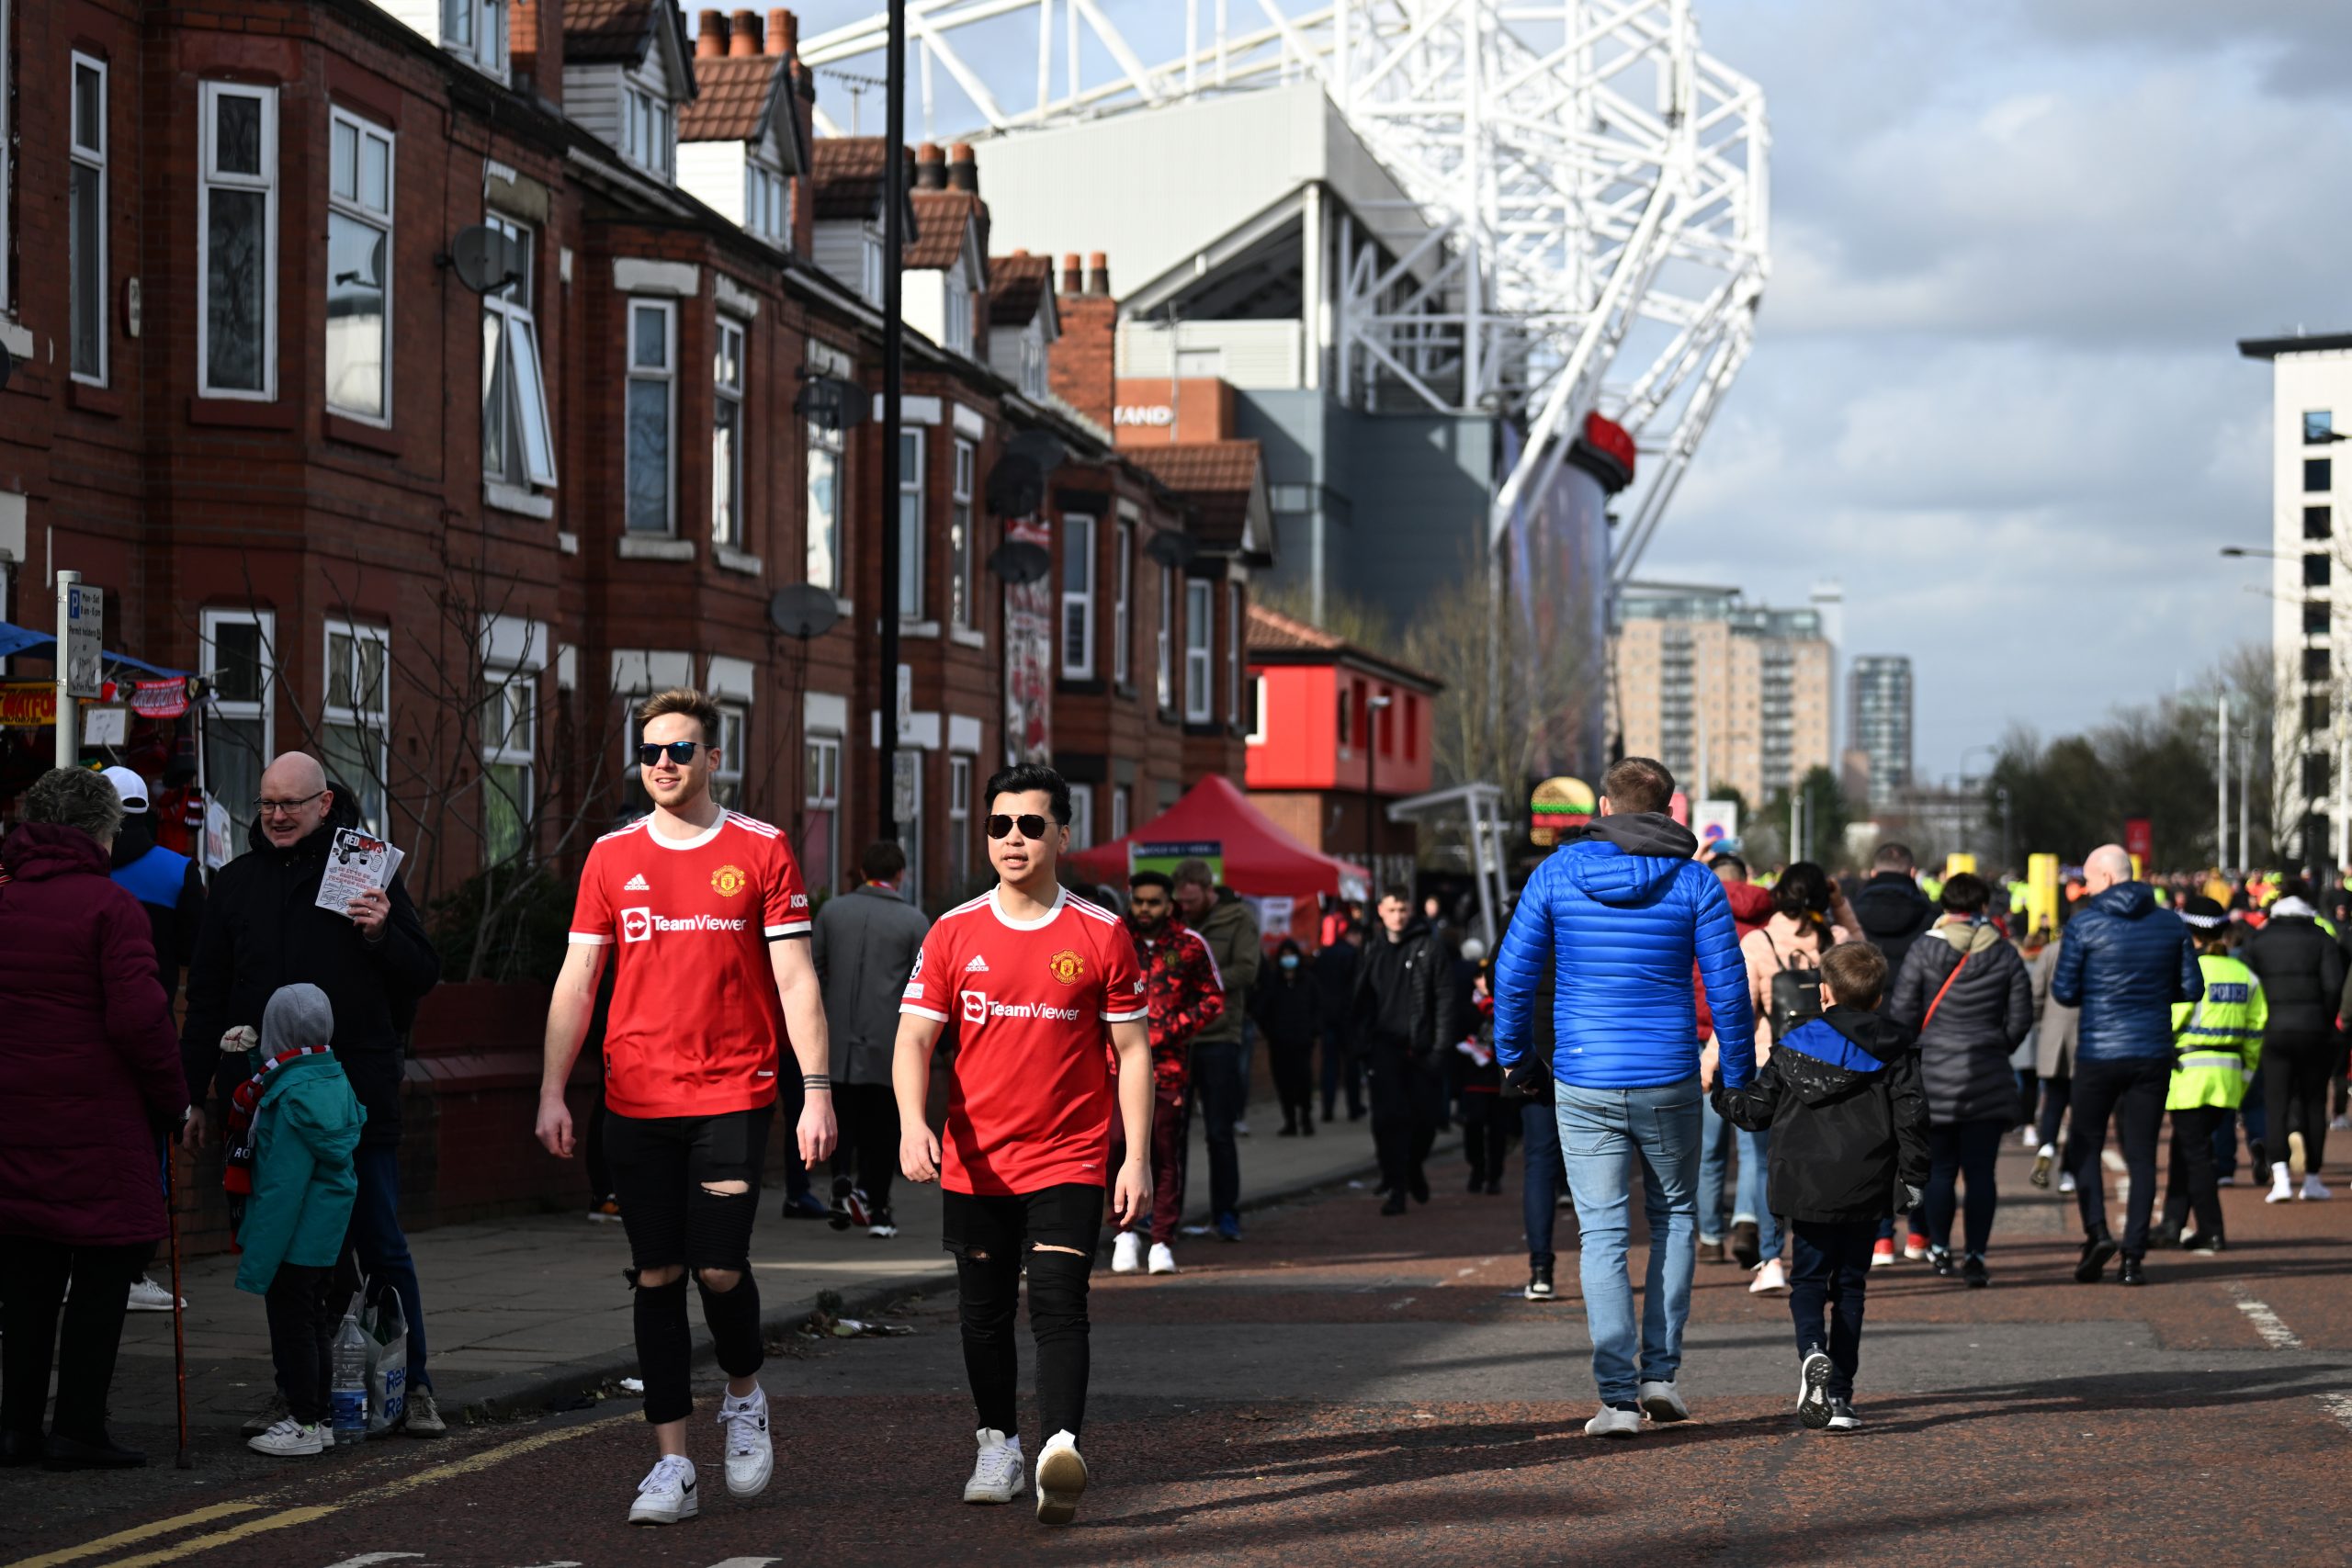 MANCHESTER, ENGLAND - FEBRUARY 26: Manchester United fans gather outside Old Trafford before the Premier League match between Manchester United and Watford at Old Trafford on February 26, 2022 in Manchester, England. (Photo by Nathan Stirk/Getty Images)The 4th Official uses images provided by the following image agency: Getty Images (https://www.gettyimages.de/) and Imago Images (https://www.imago-images.de/)